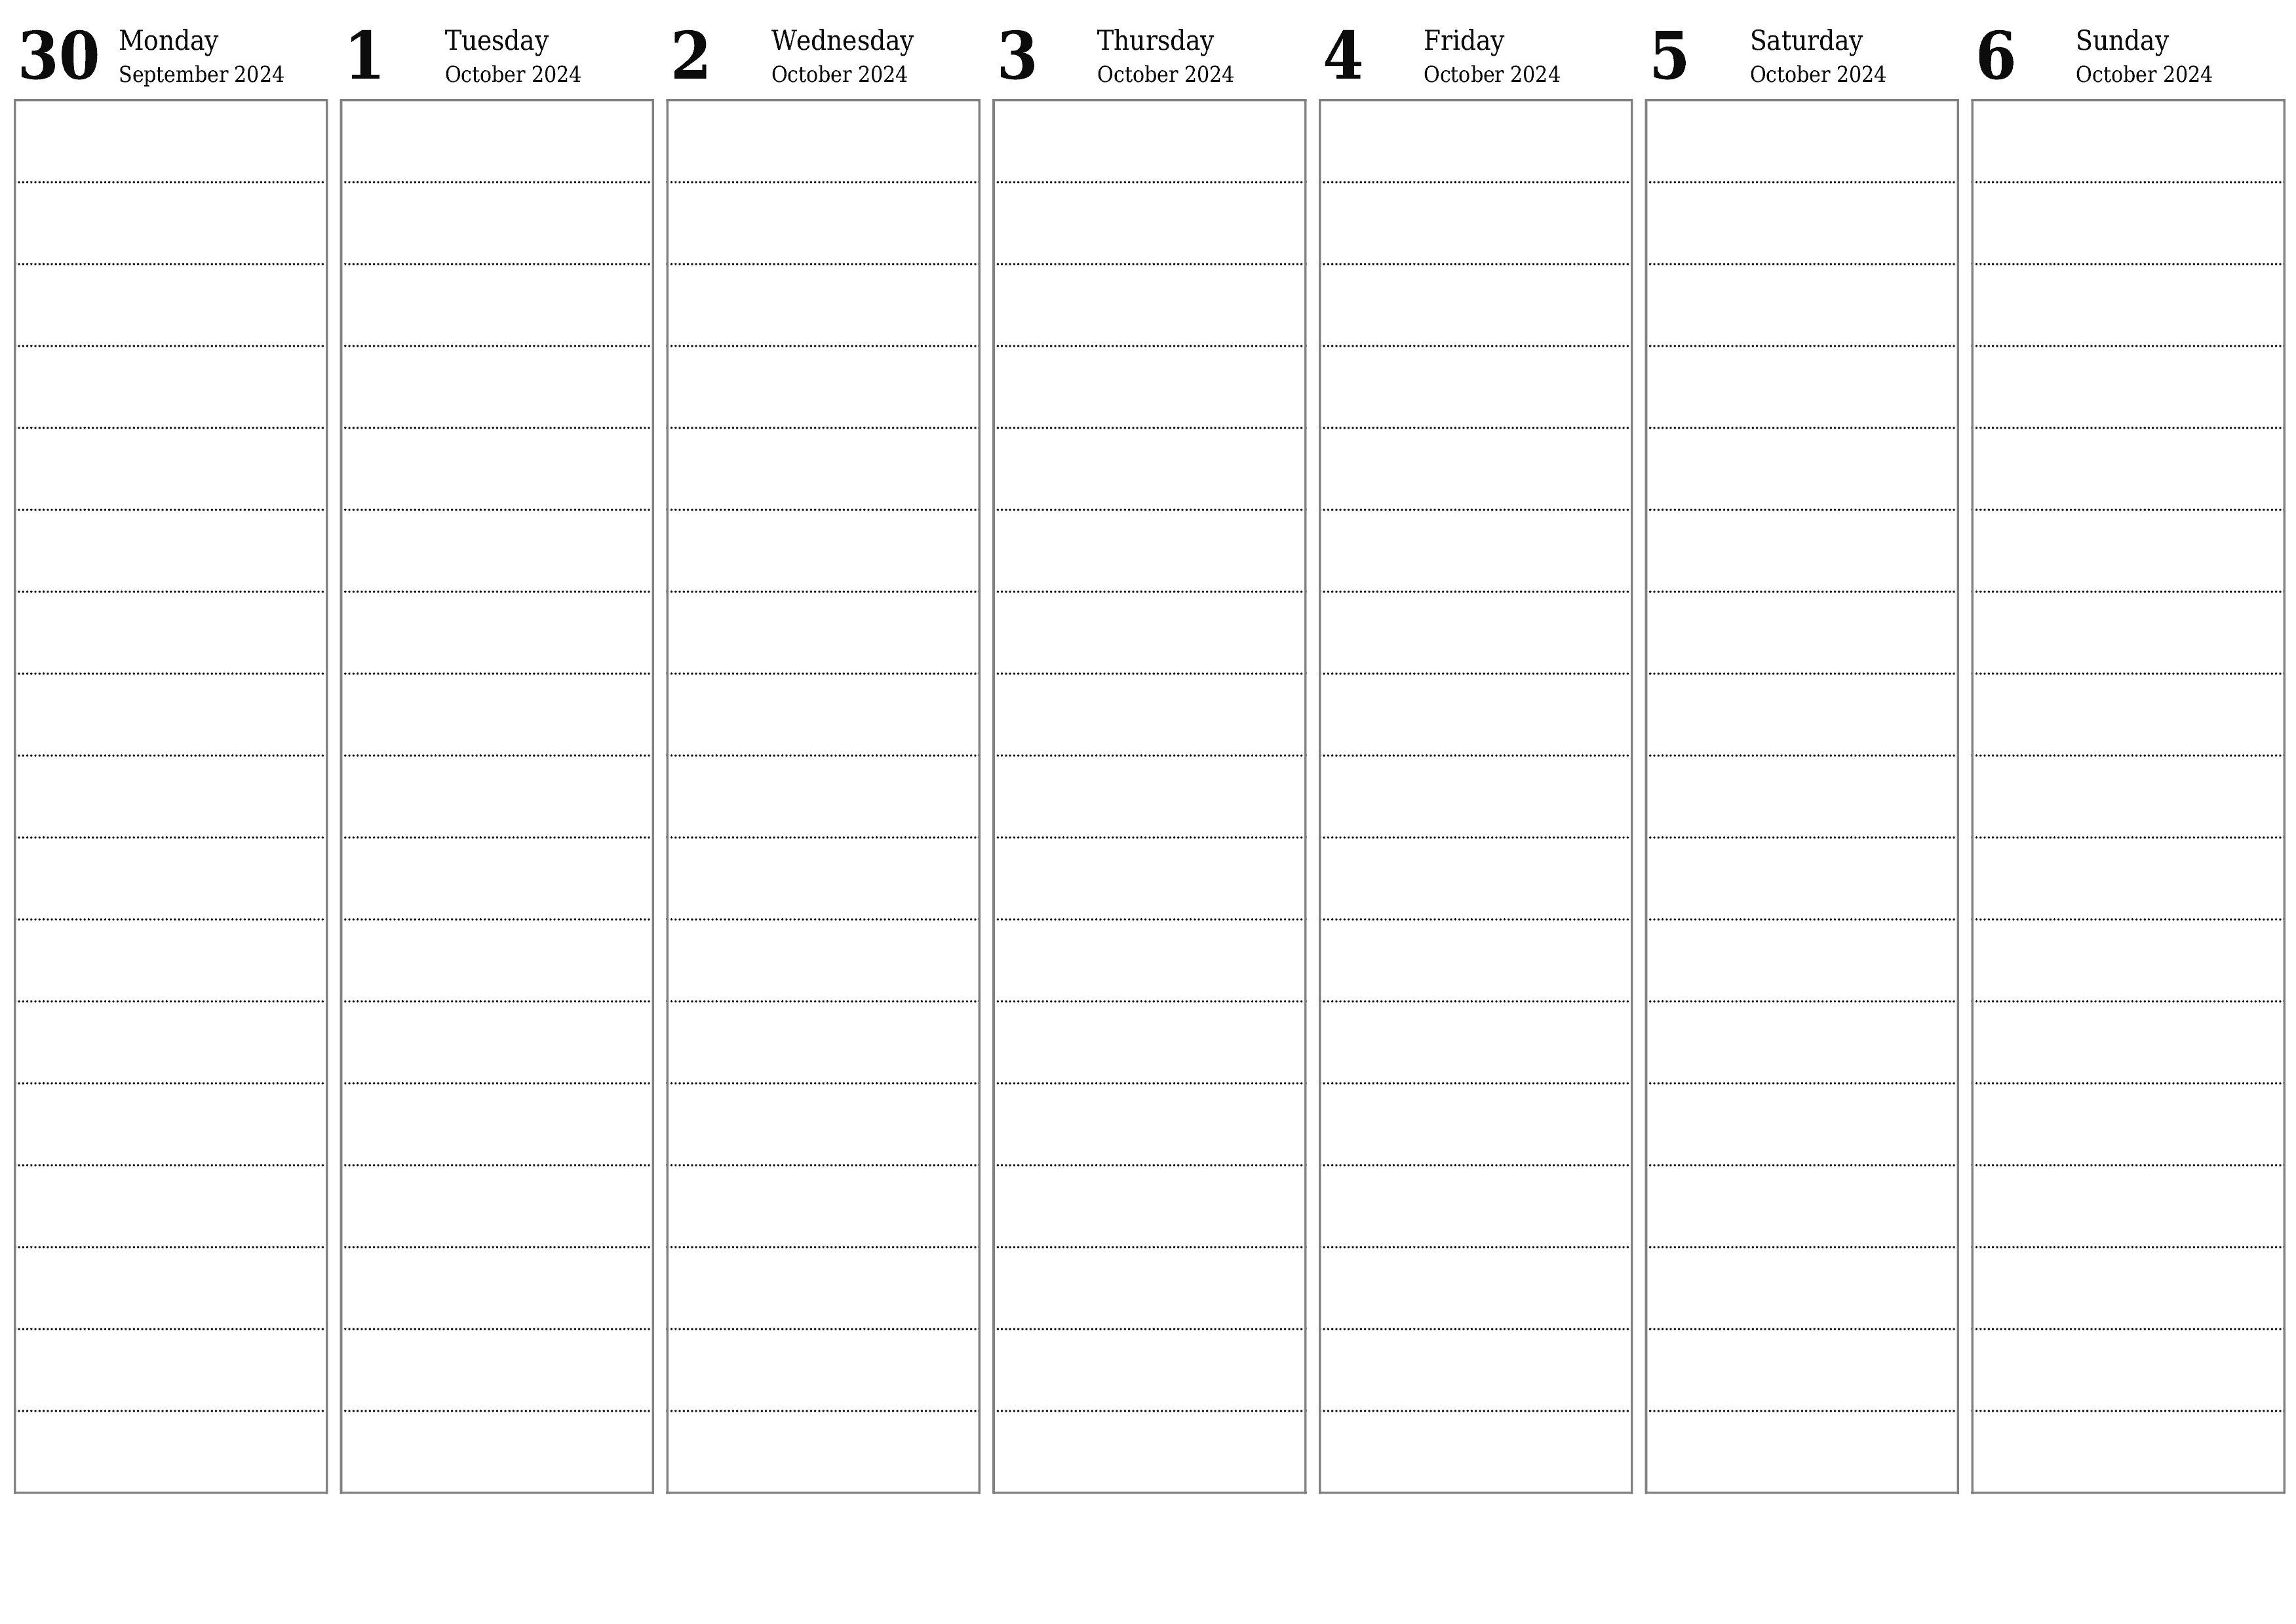 Blank weekly printable calendar and planner for week October 2024 with notes, save and print to PDF PNG English